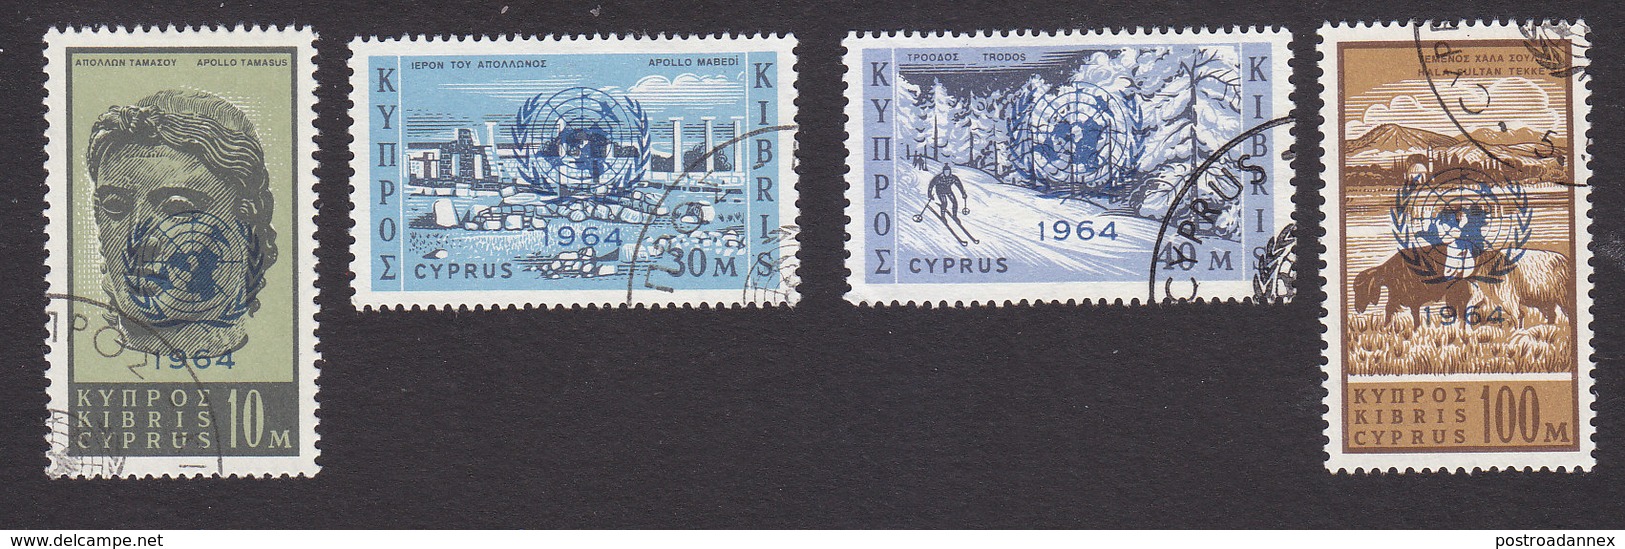 Cyprus, Scott #232-234, 236, Used, Stamps Of Cyprus With UN Overprint, Issued 1964 - Usati